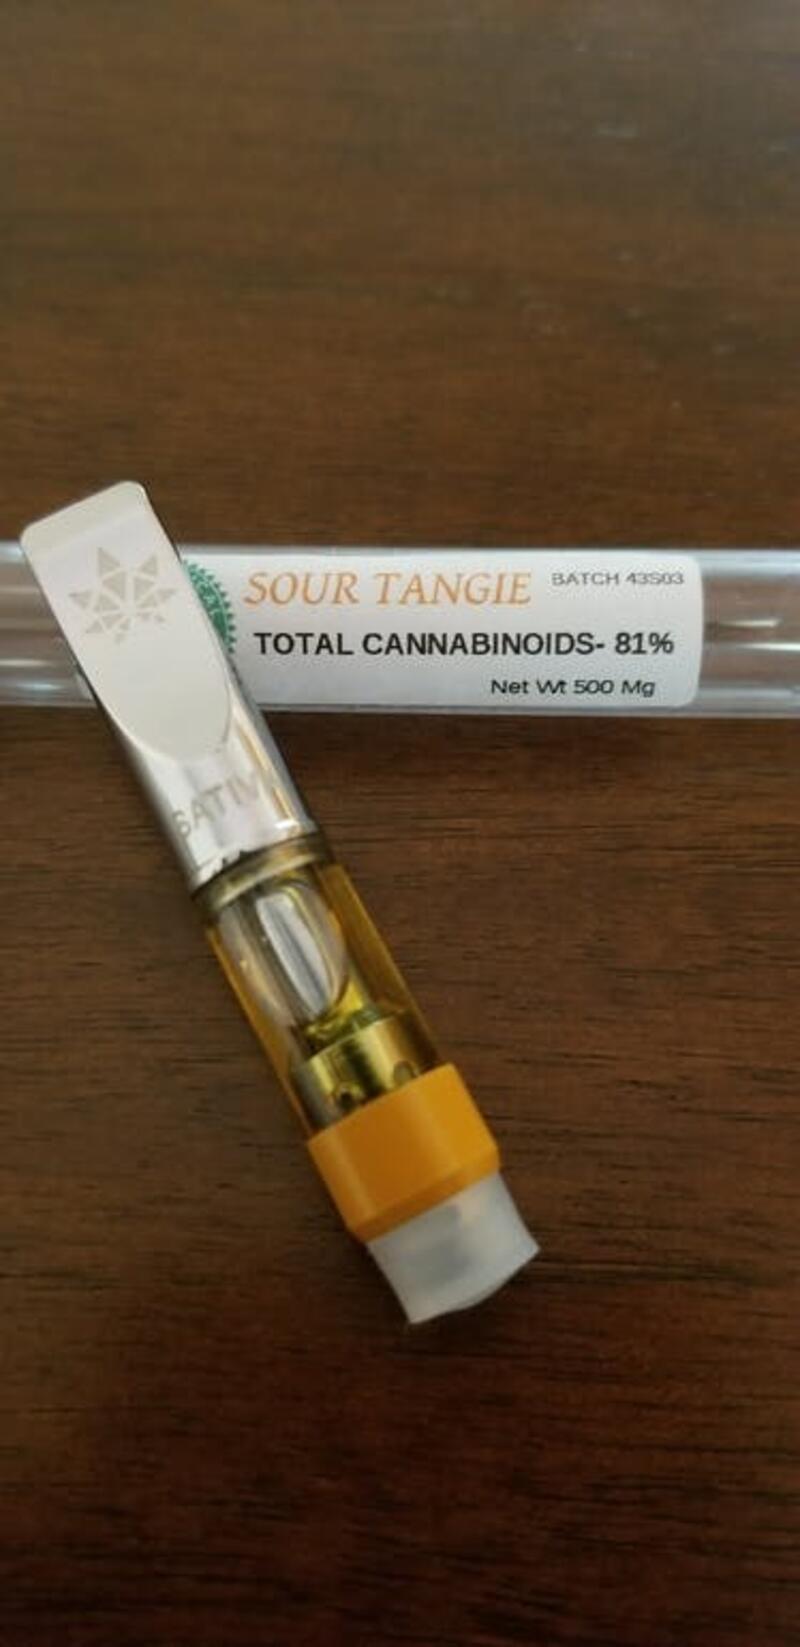 "SOUR TANGIE"